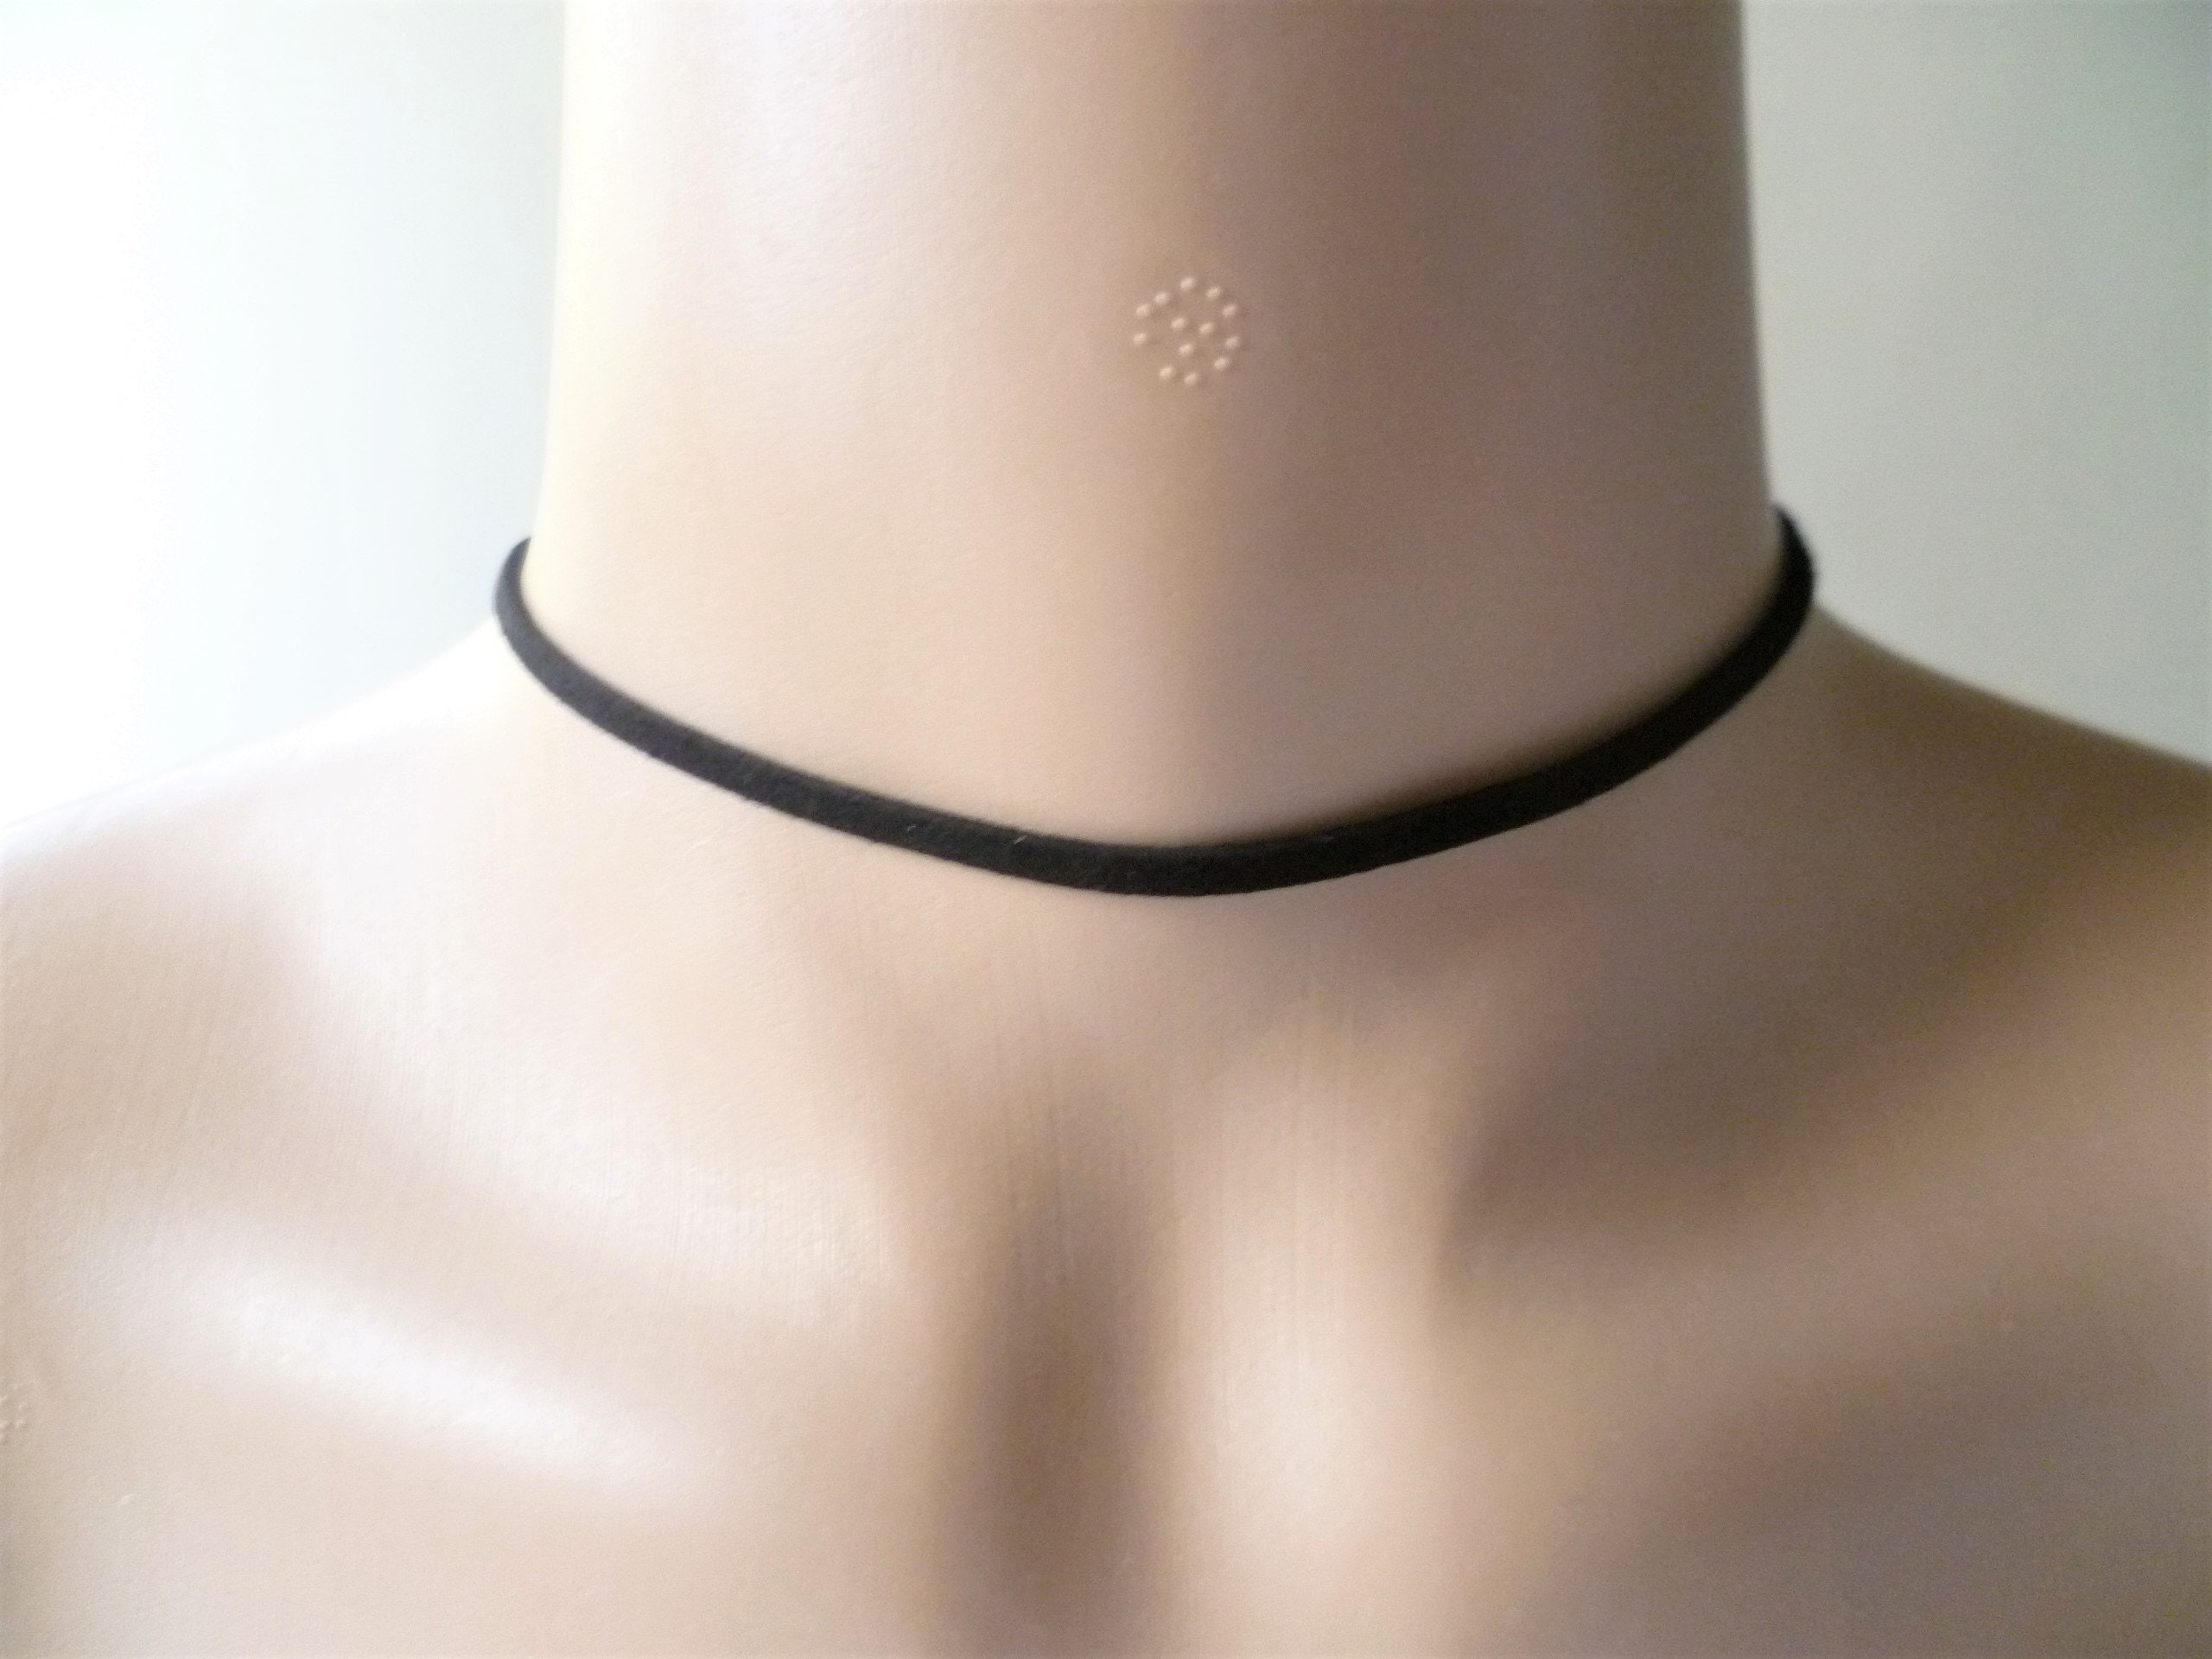 TINKSKY Choker Collar Necklace Leather Punk Gothic Pu Goth Studded